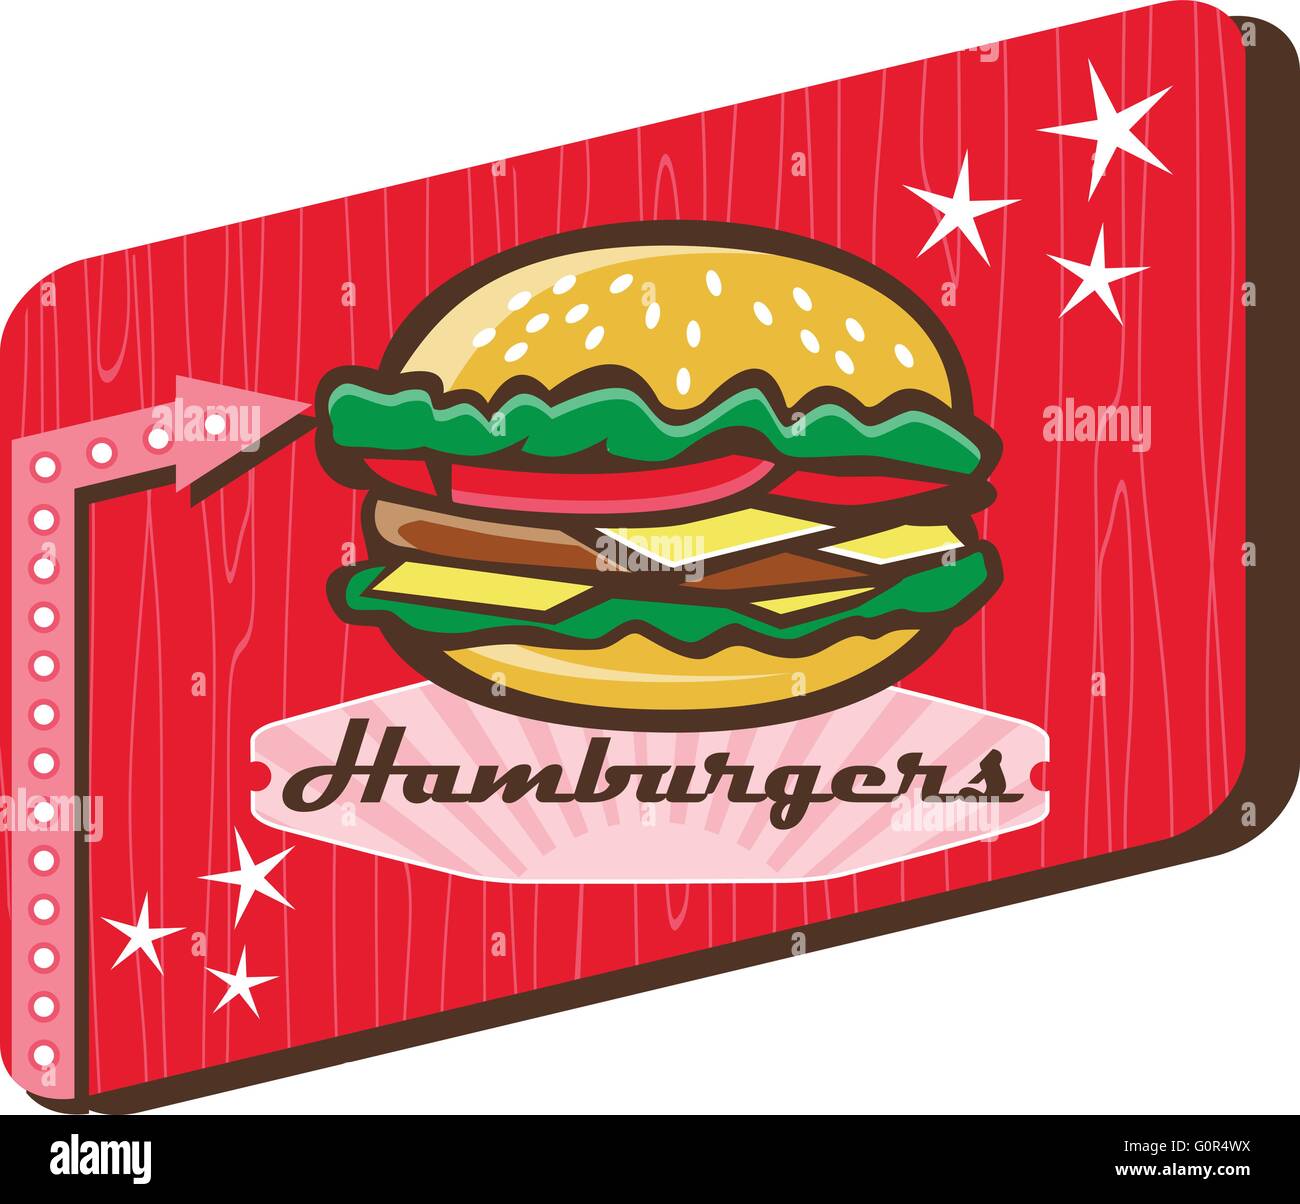 Illustration of a retro 1950s diner style hamburger, burger or cheeseburger with meat patty, lettuce, tomato and cheese slices in bun set inside rectangular sign with woodgrain. Stock Vector